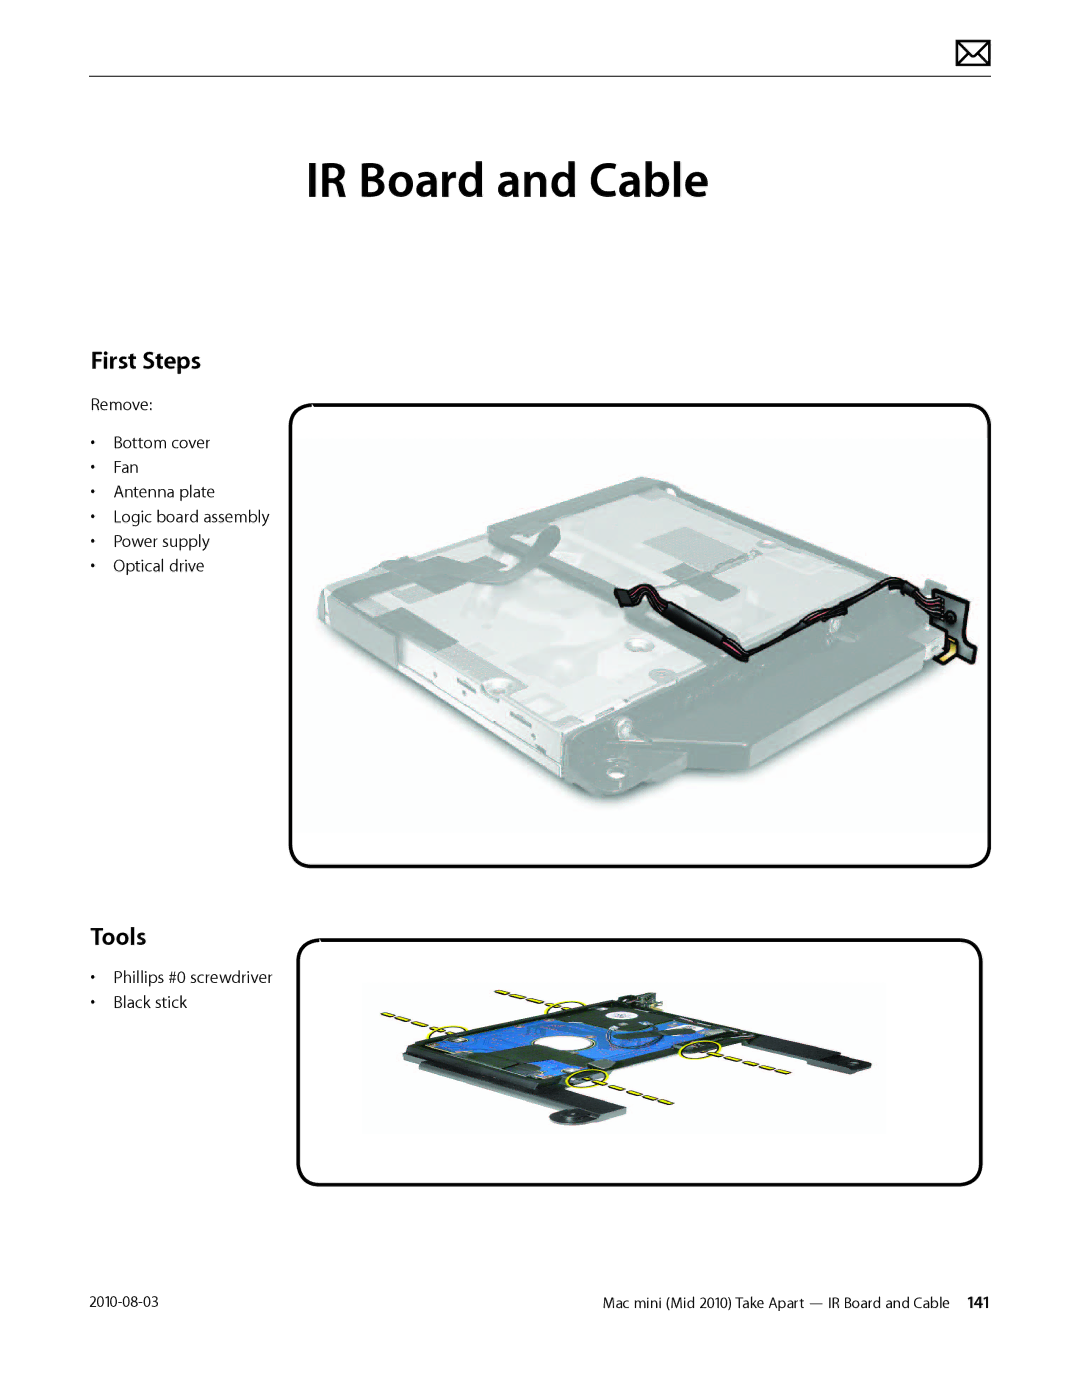 Apple Mac mini manual IR Board and Cable, First Steps 